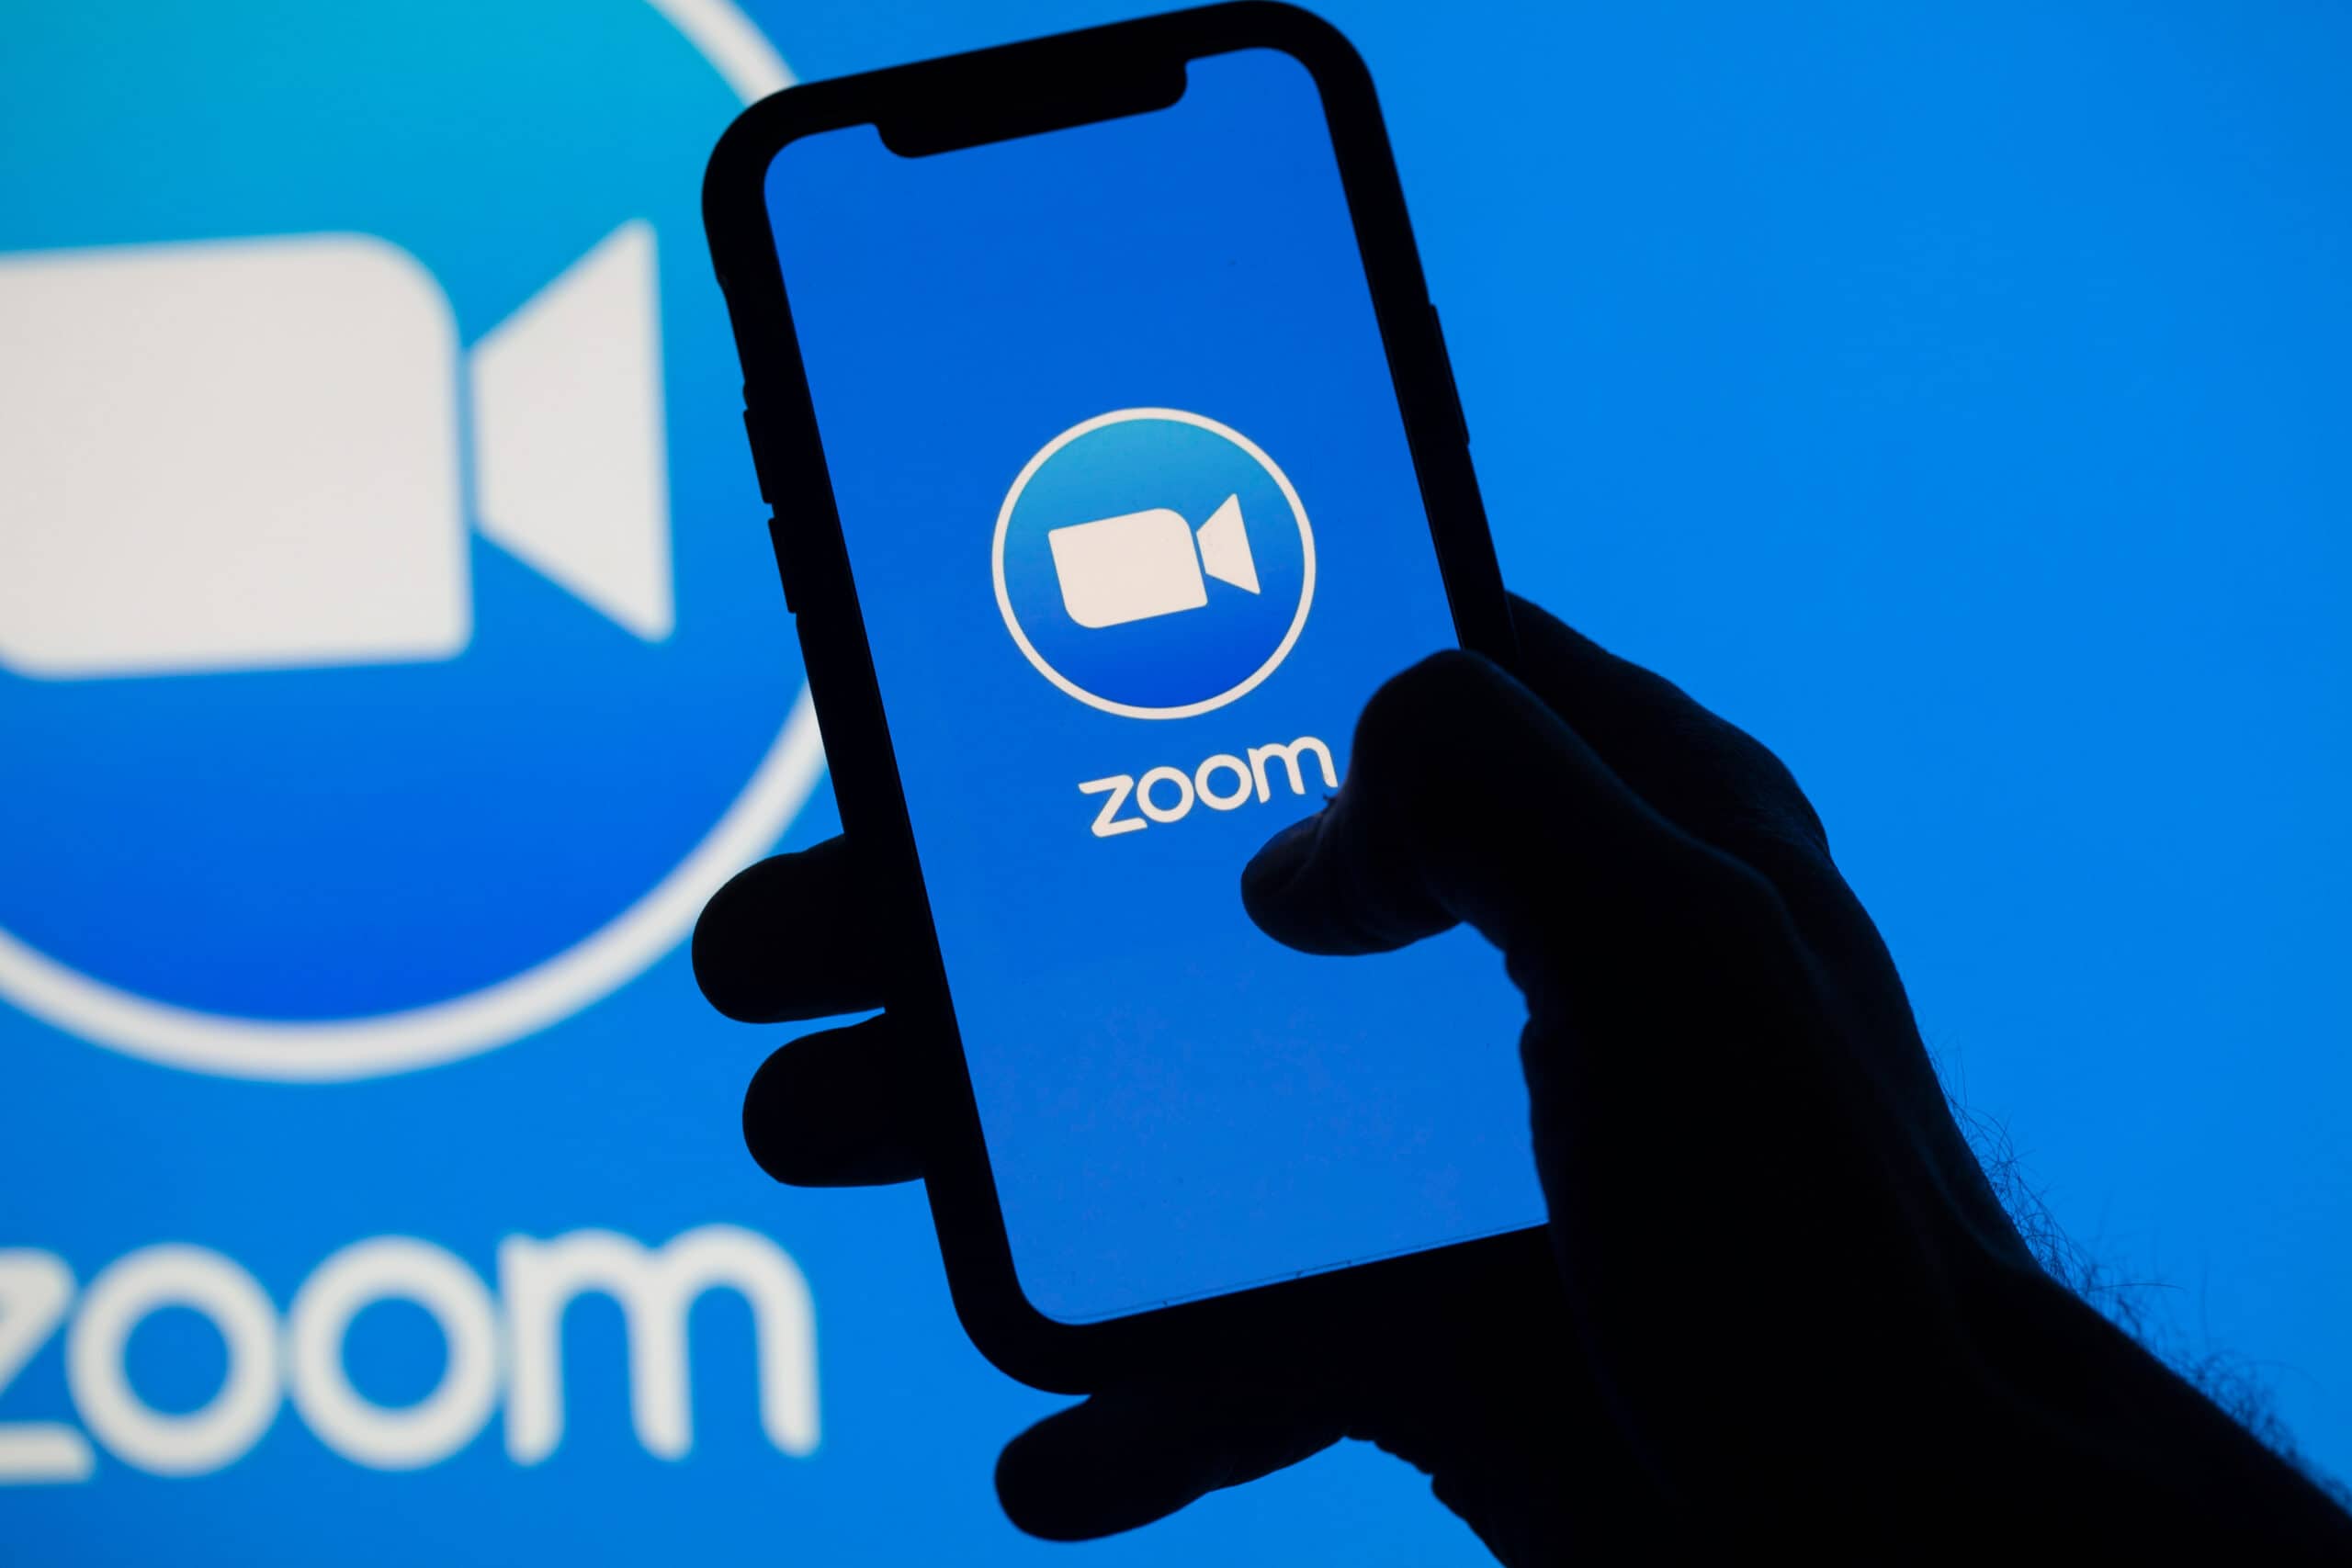 zoom on a smartphone screen